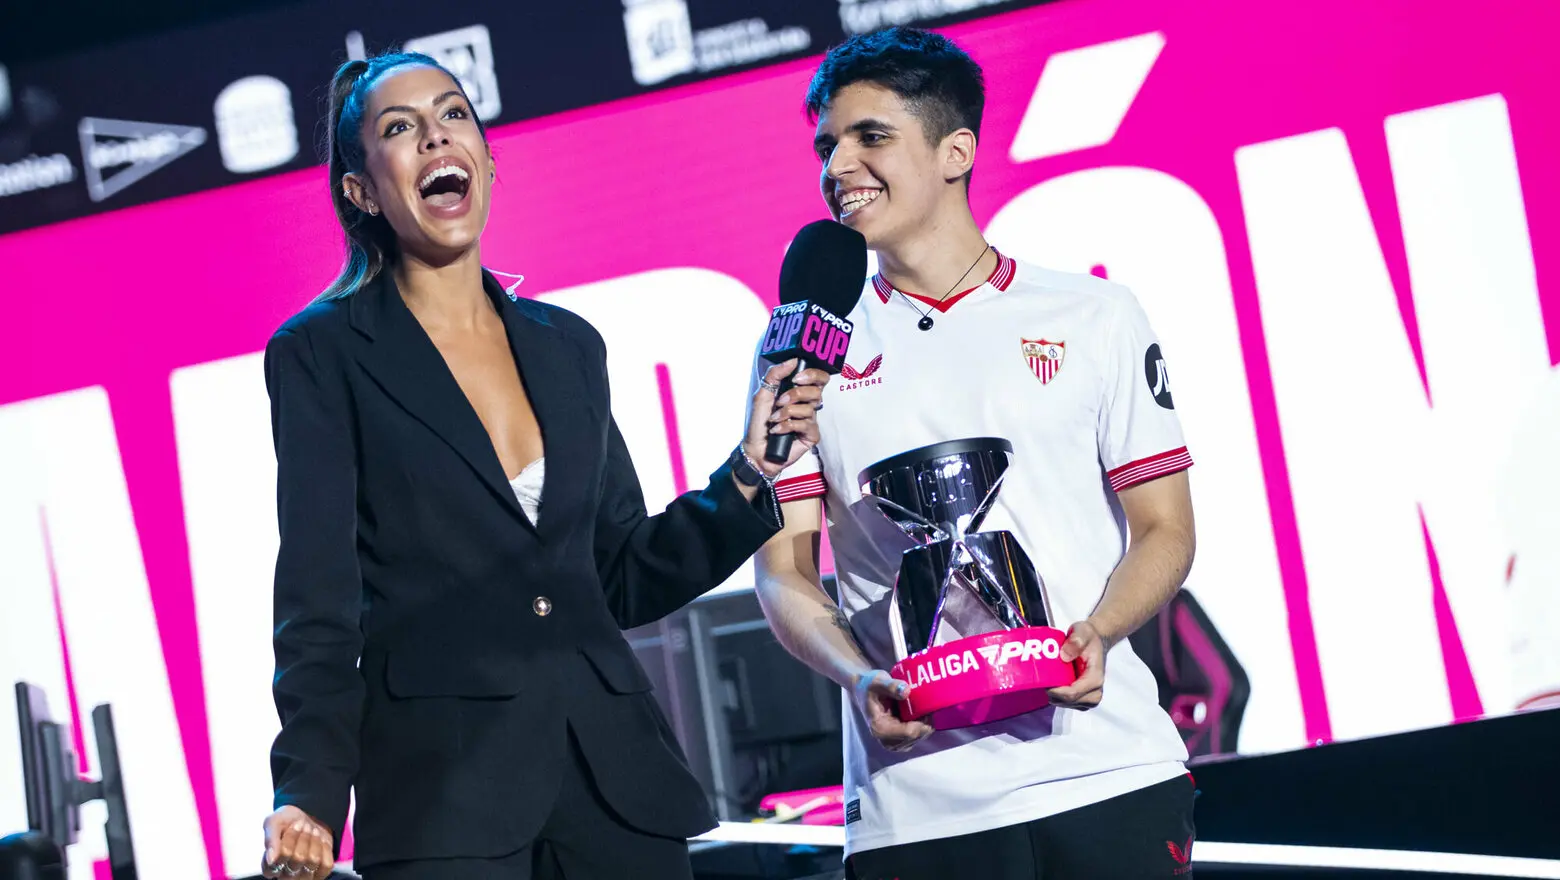 Nicolas99 and His Demanding Motivation: “I’m Quite Motivated Knowing That If I Lose a Match I’m Out”